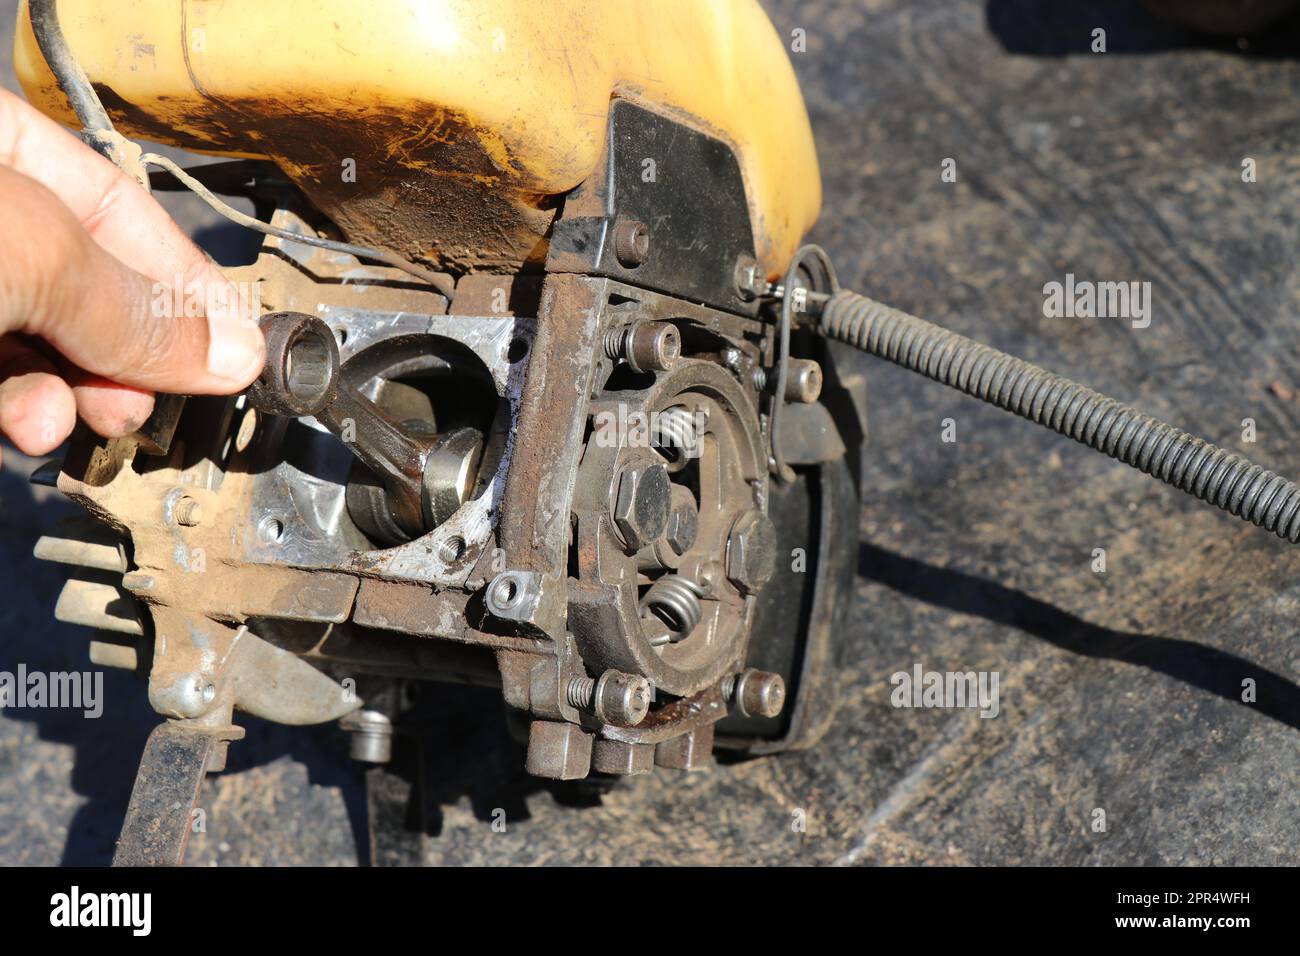 Connecting rod from a small petrol engine used on brush cutters. Repairing gasoline powered grass cutting machine Stock Photo